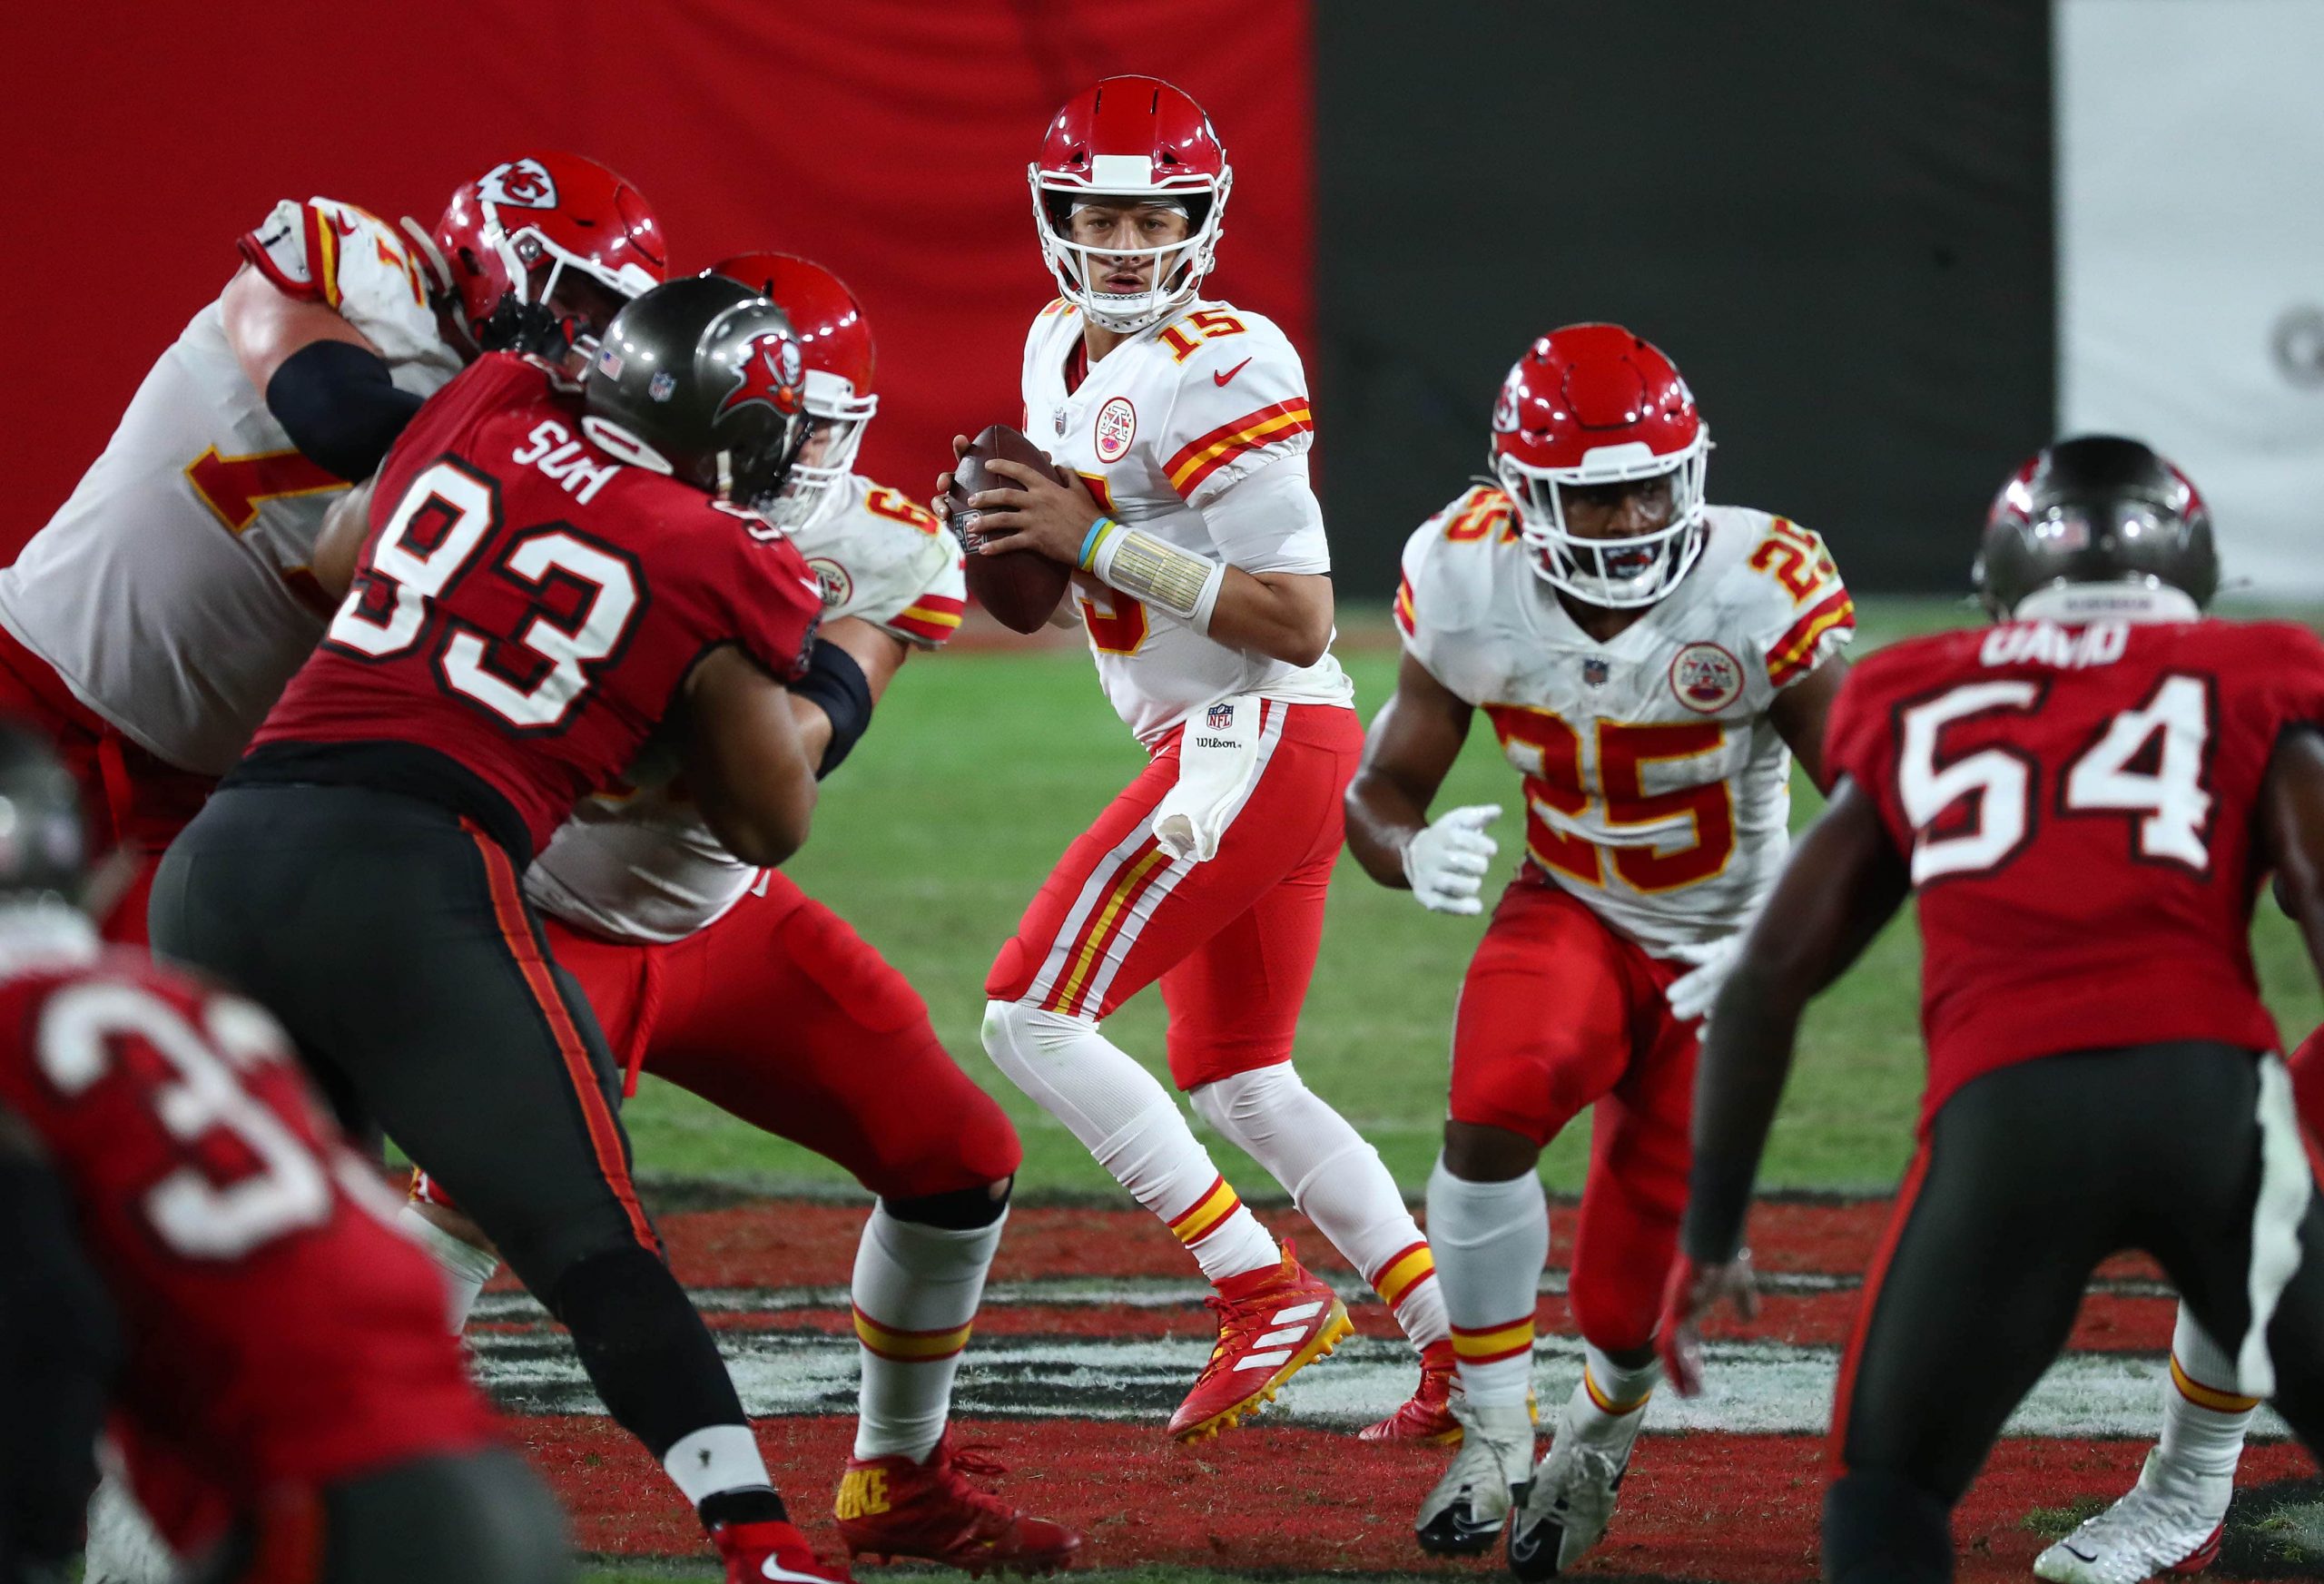 Kansas City Chiefs quarterback Patrick Mahomes (15) drops back to pass against the Tampa Bay Buccaneers during the second half at Raymond James Stadium.